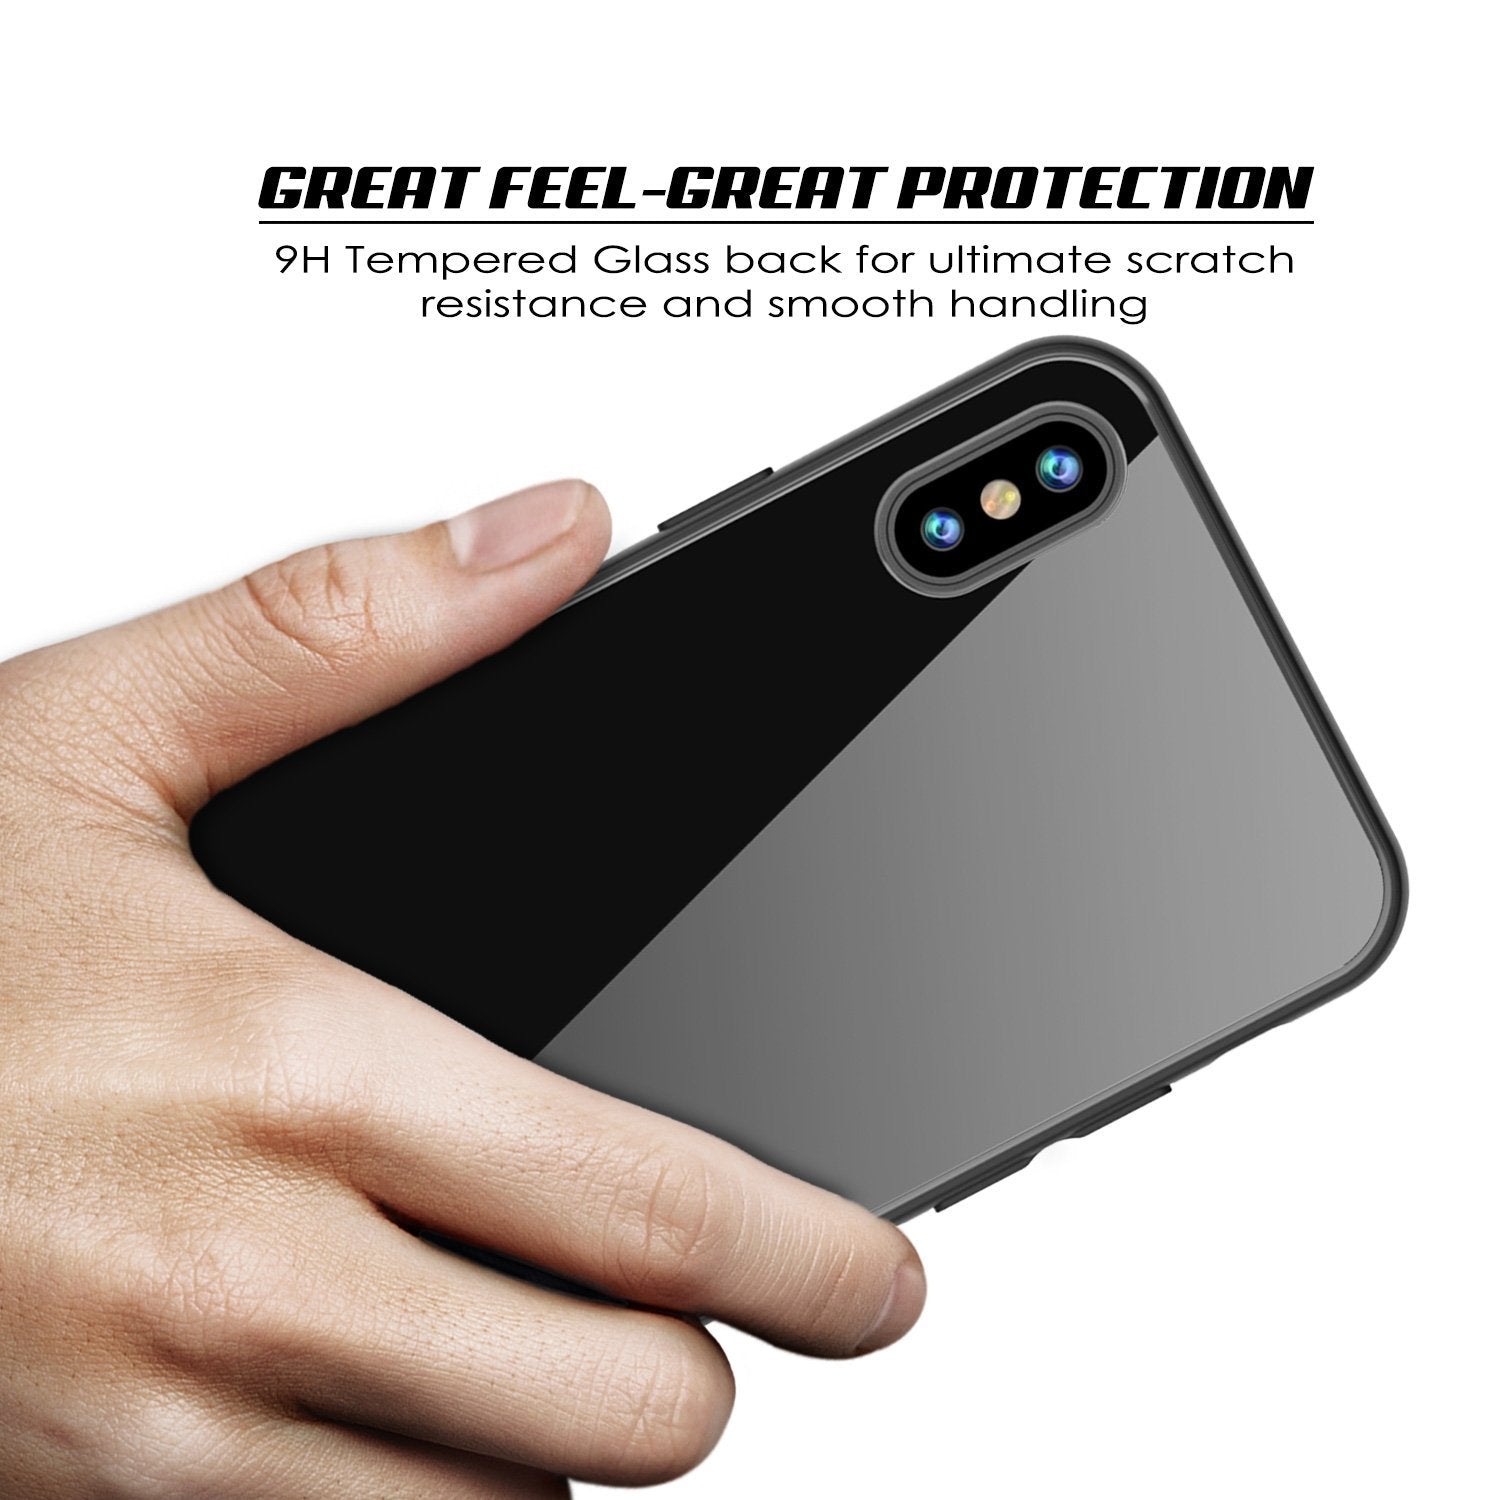 iPhone 8 Case, Punkcase GlassShield Ultra Thin Protective 9H Full Body Tempered Glass Cover W/ Drop Protection & Non Slip Grip for Apple iPhone 7 / Apple iPhone 8 (Black)